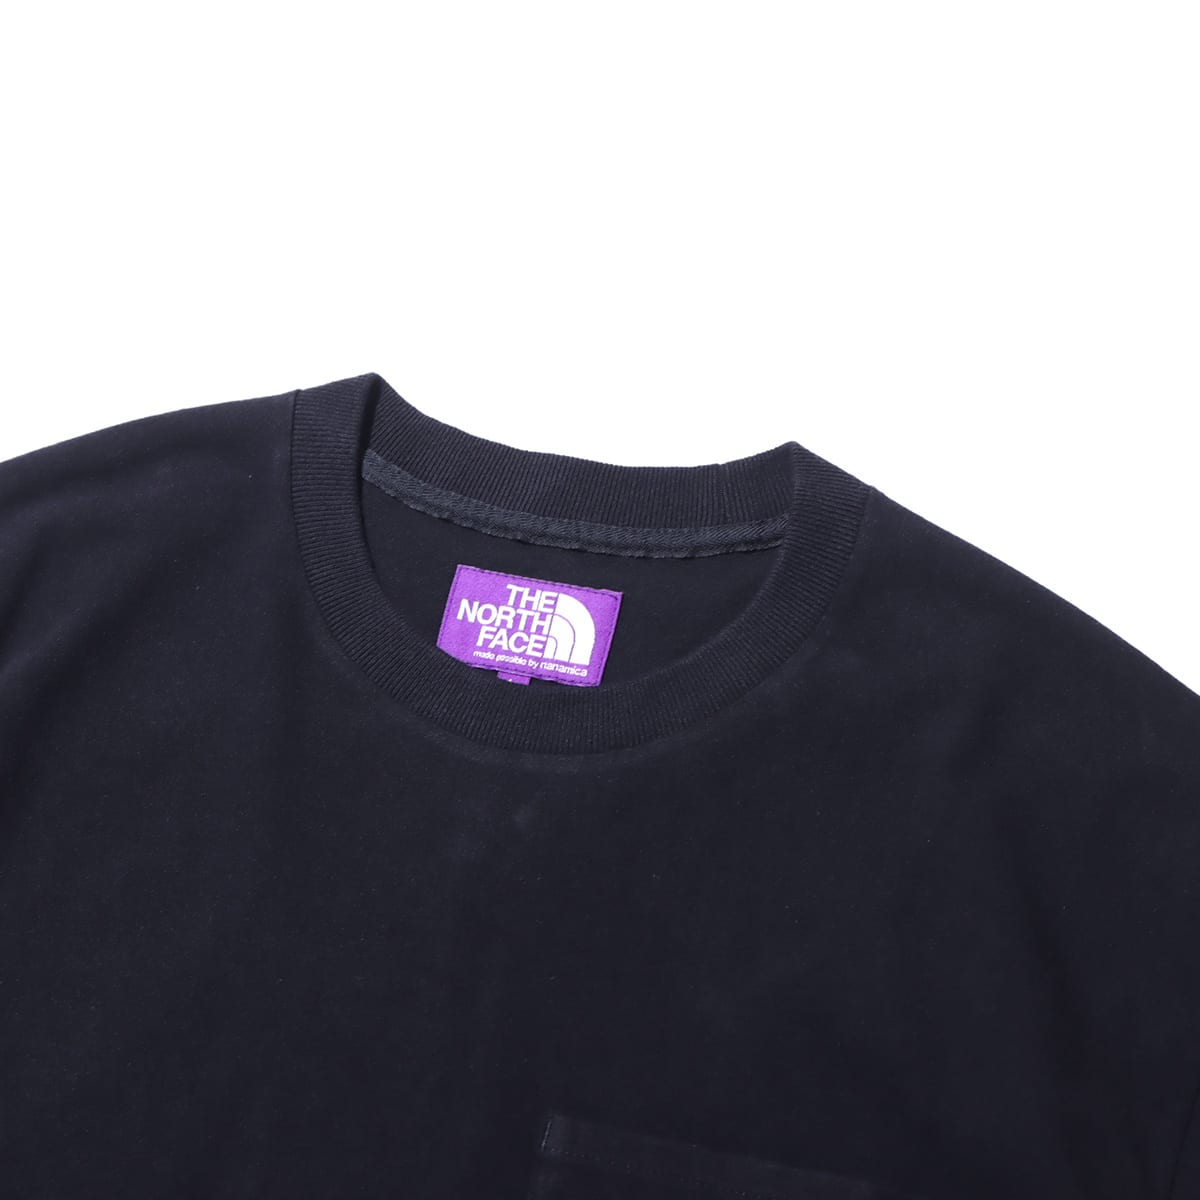 THE NORTH FACE PURPLE LABEL High Bulky Pocket Tee Black 23FW-I